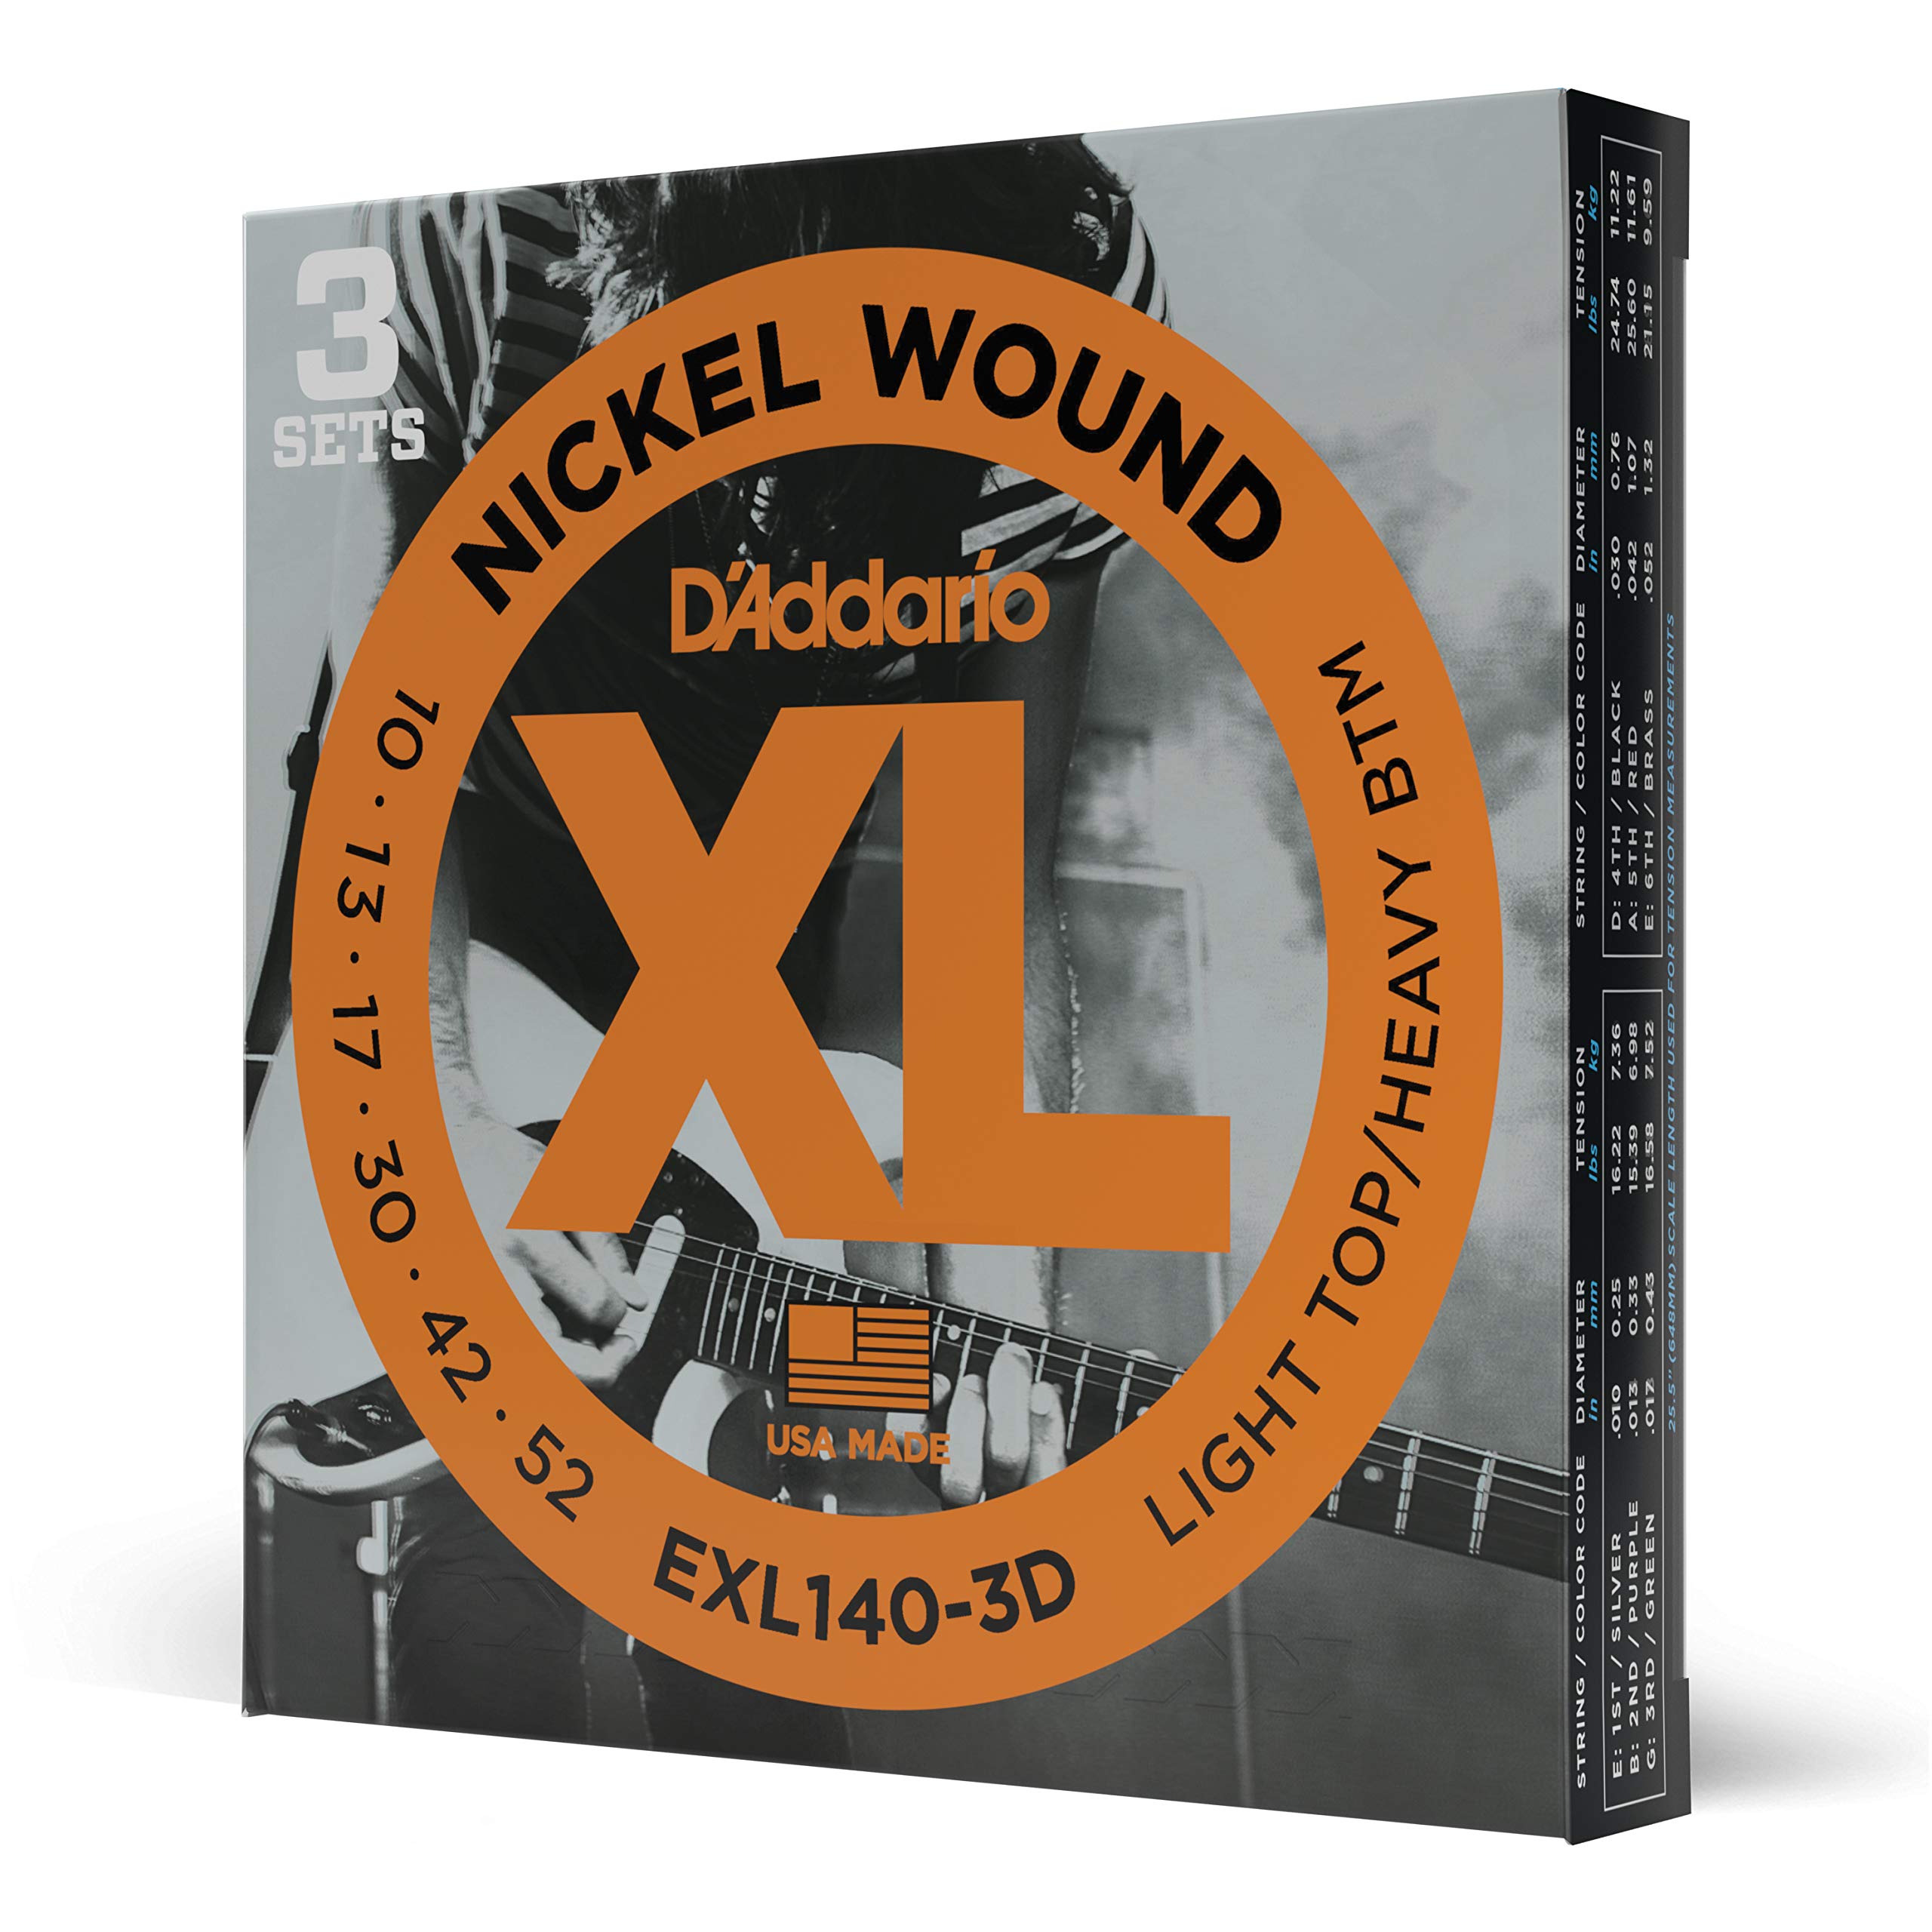 Book Cover D'Addario Guitar Strings - XL Nickel Electric Guitar Strings - EXL140-3D - Perfect Intonation, Consistent Feel, Reliable Durability - For 6 String Guitars - 10-52 Light Top/Heavy Bottom, 3-Pack Lt. Top/Hvy. Bottom, 10-52 3-Pack